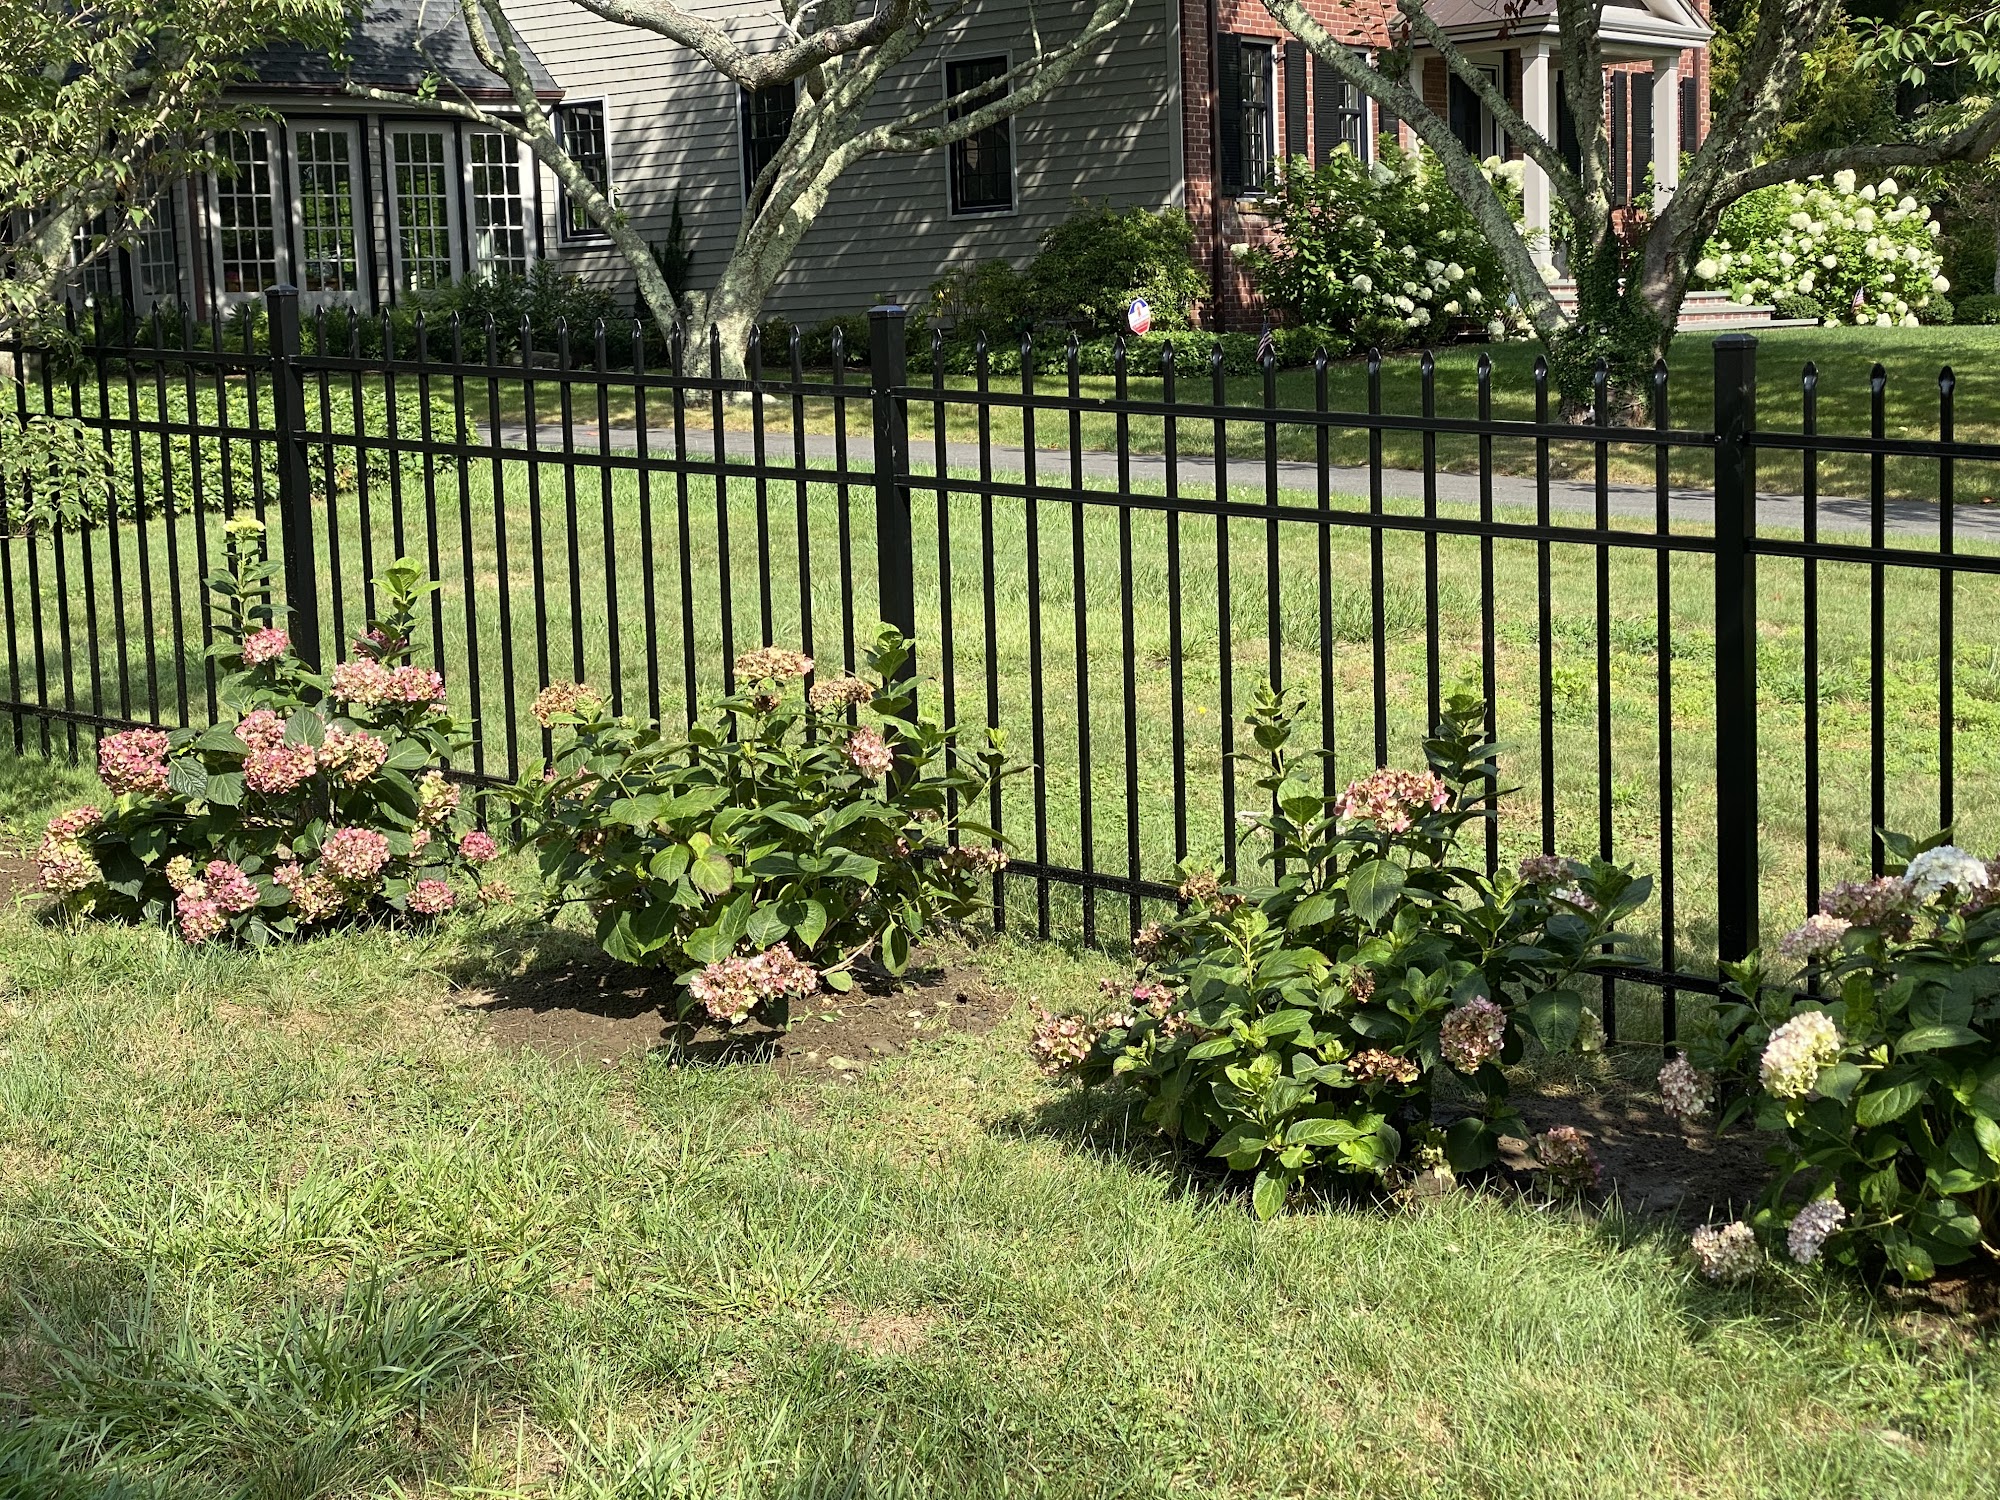 AEP Fence Services Inc.